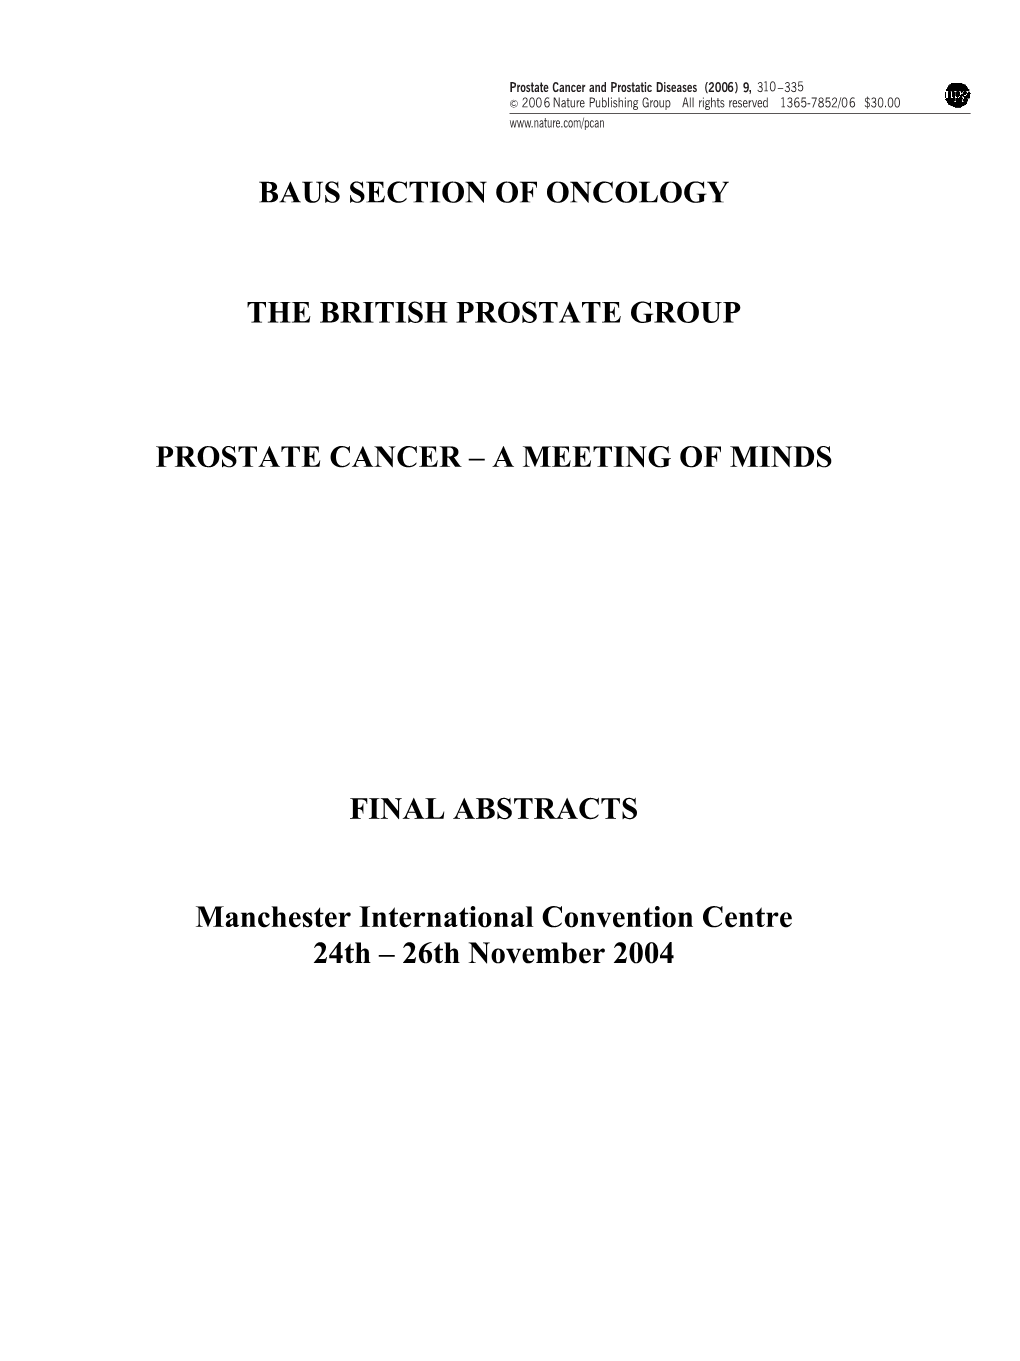 Baus Section of Oncology the British Prostate Group